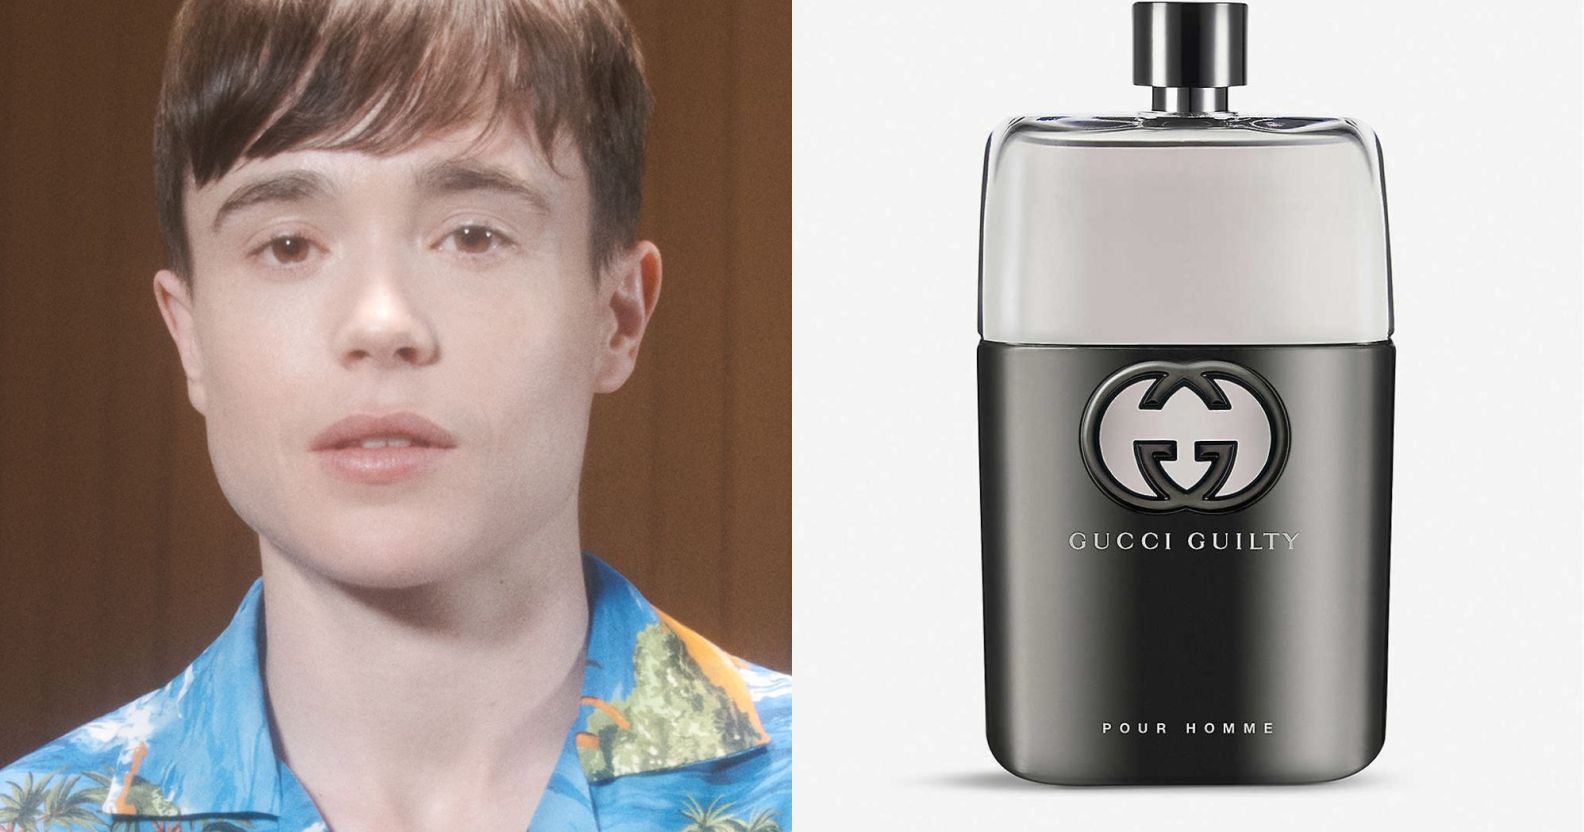 Elliot Page has been revealed as the new face of Gucci Beauty.